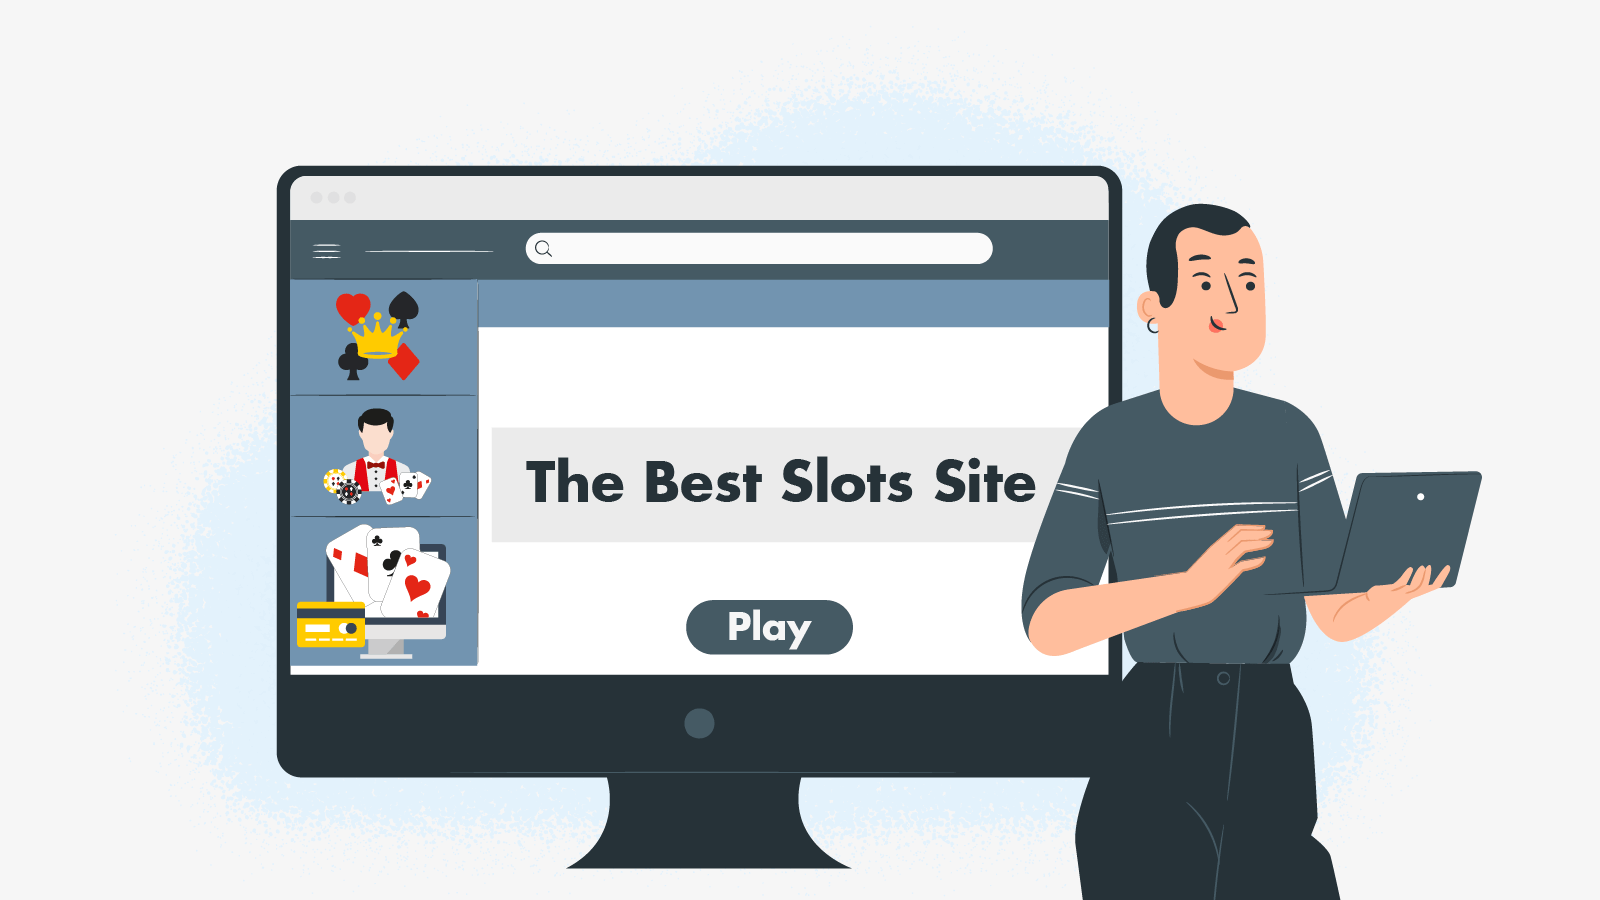 Picking the best slots site